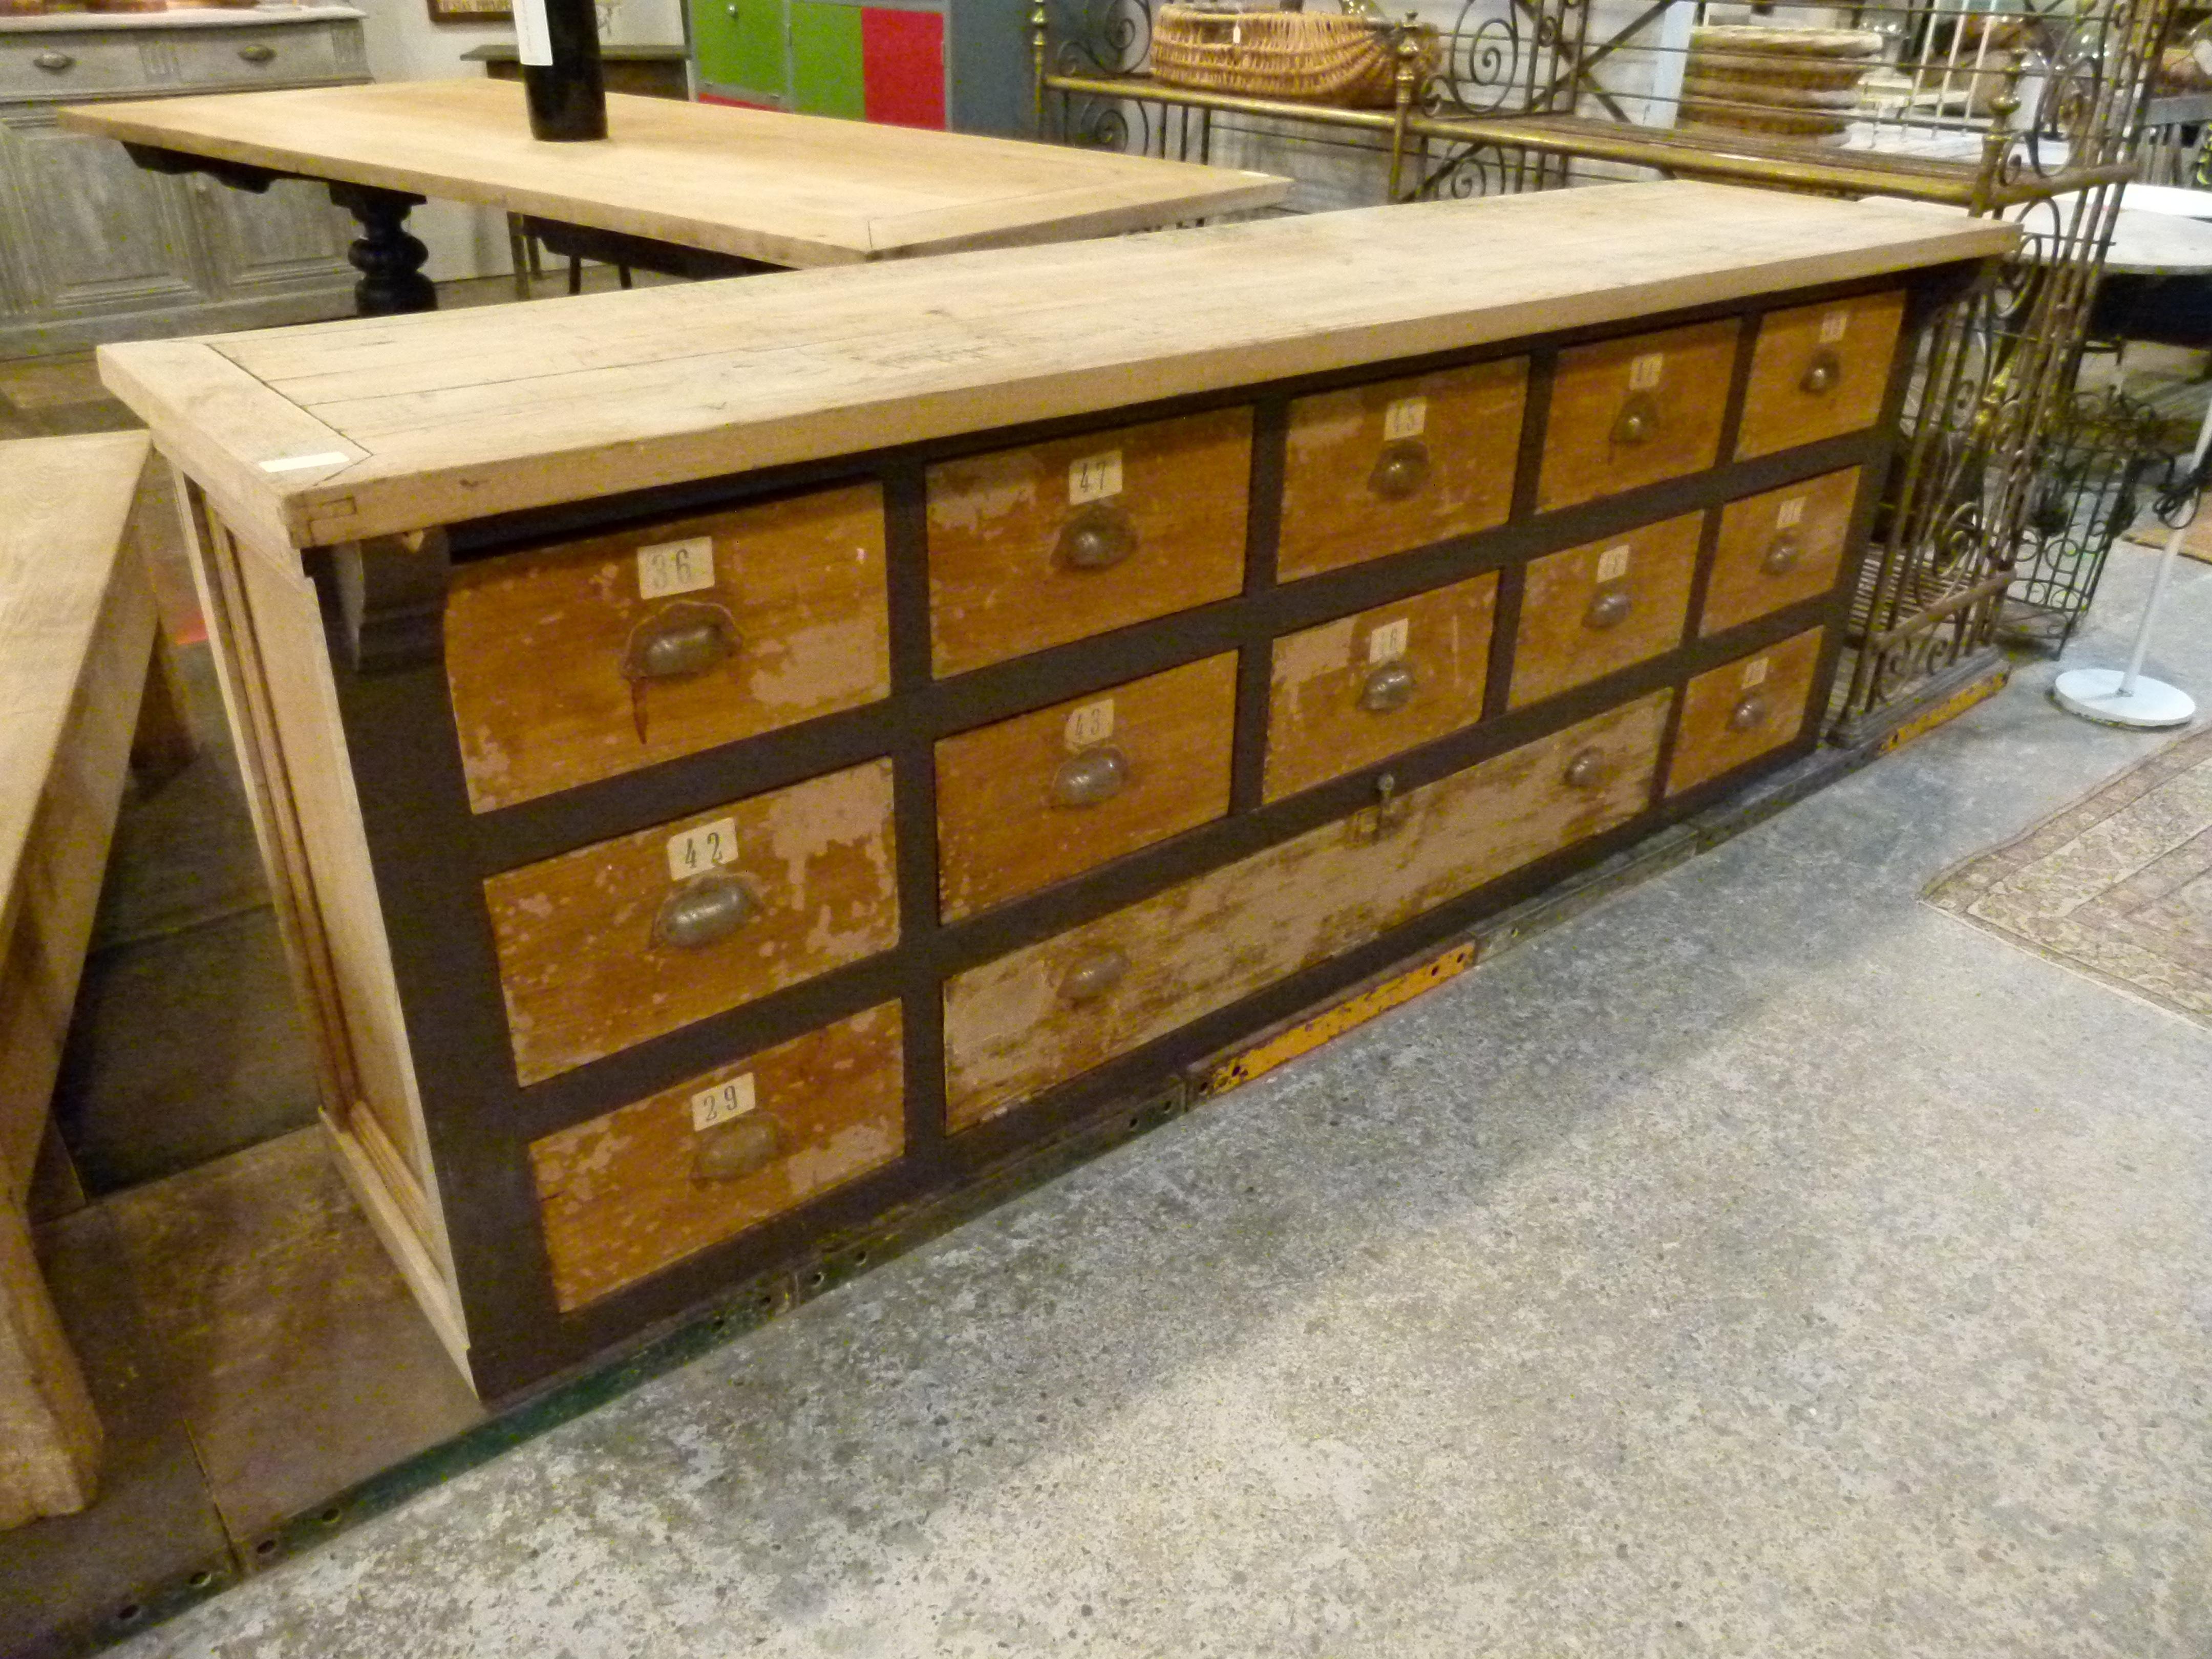 19th century multi drawer counter: 12 small drawers and a large one on the bottom.
Ideal for storing as well as decorative, bringing charm and warm to the room.

 